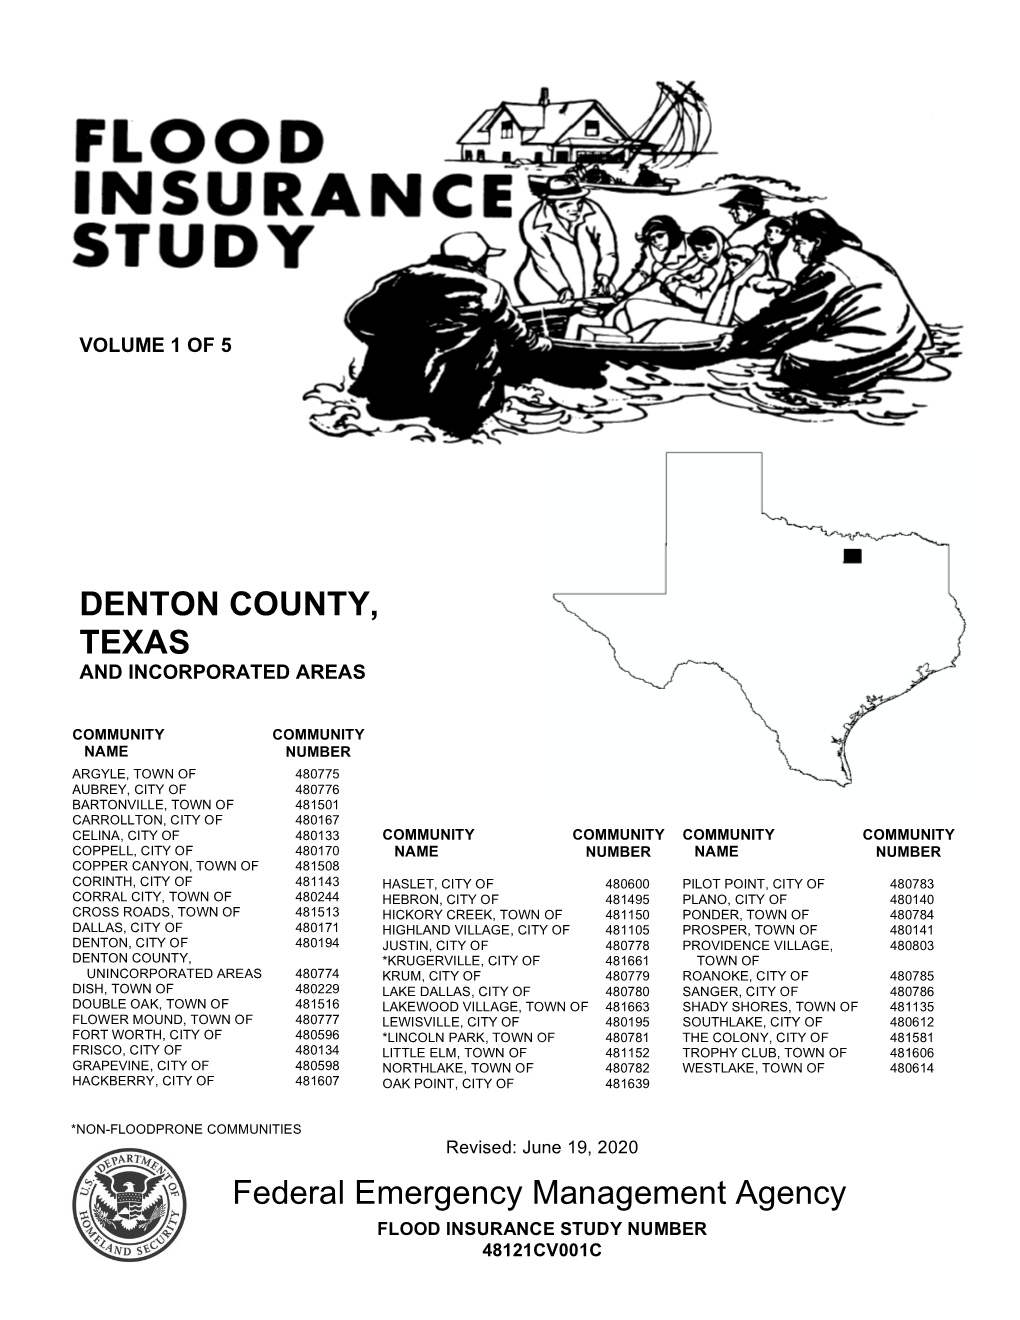 Denton County, Texas and Incorporated Areas